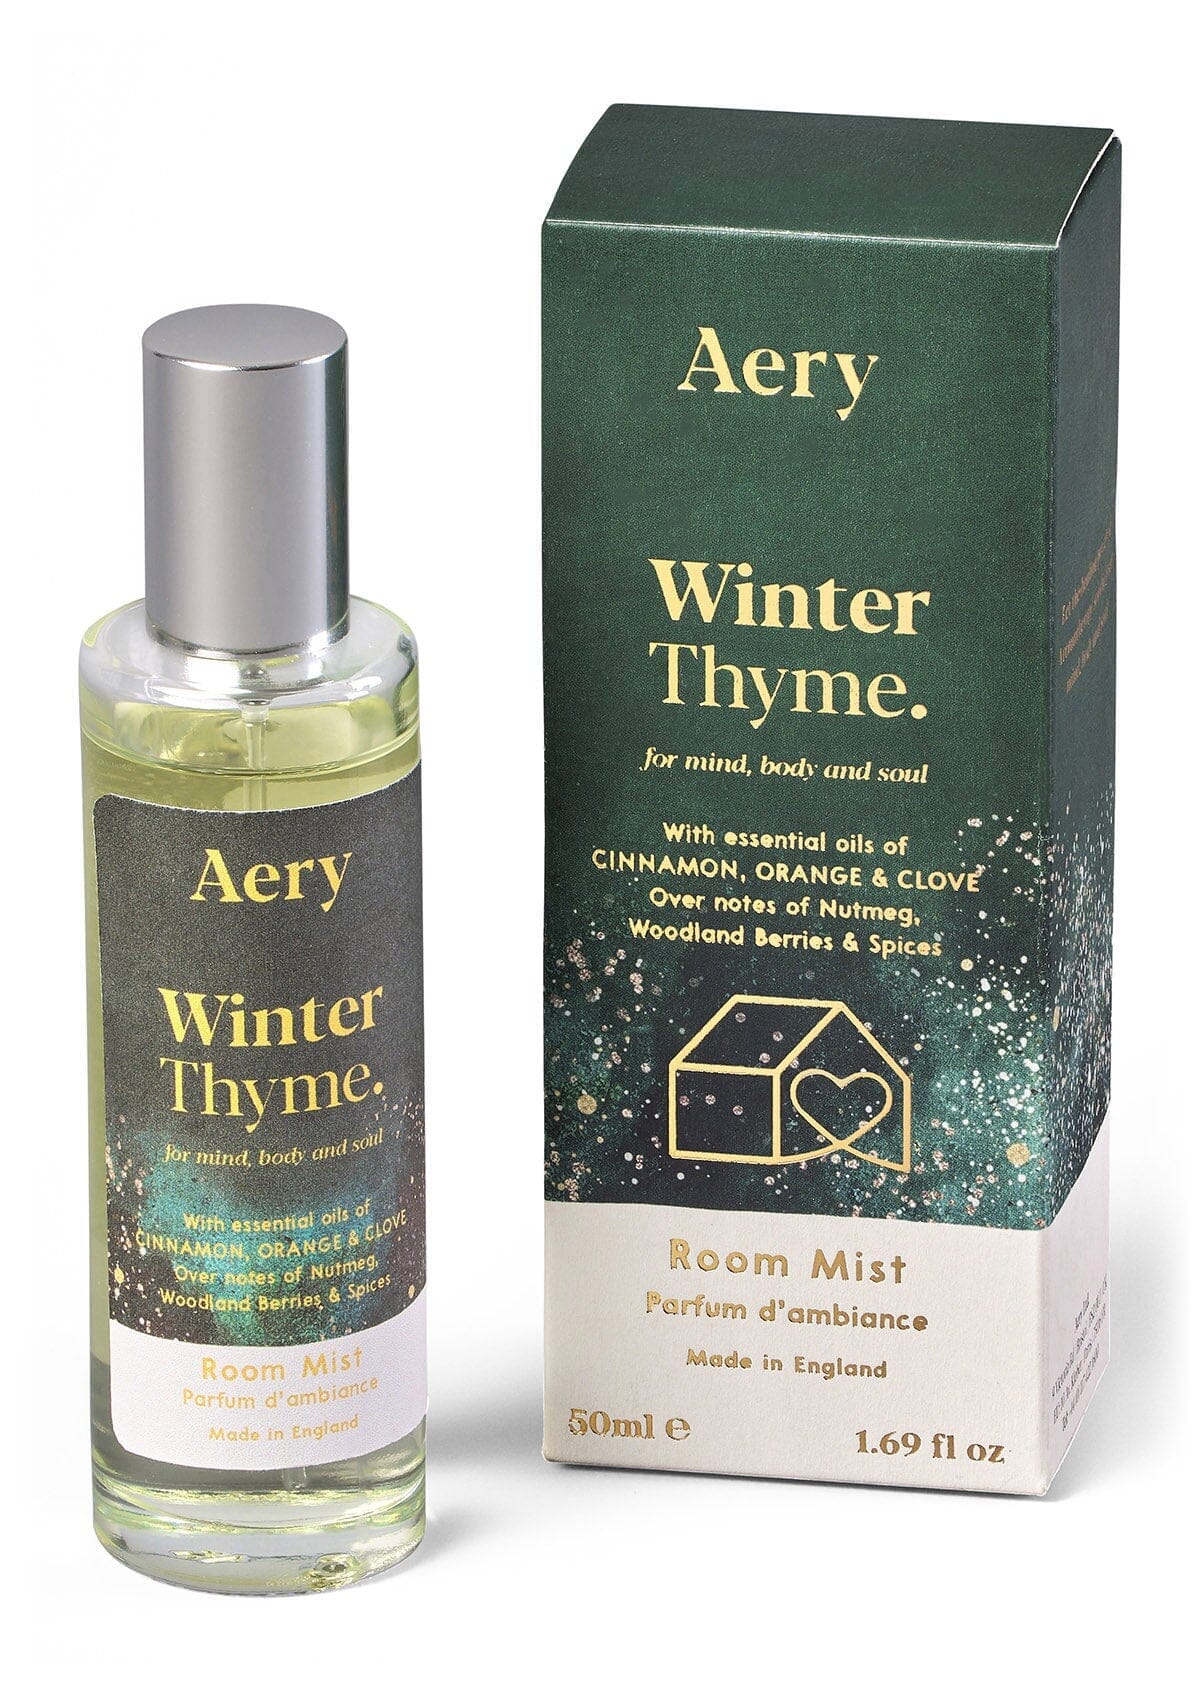 winter thyme room mist displayed next to decorative product packaging